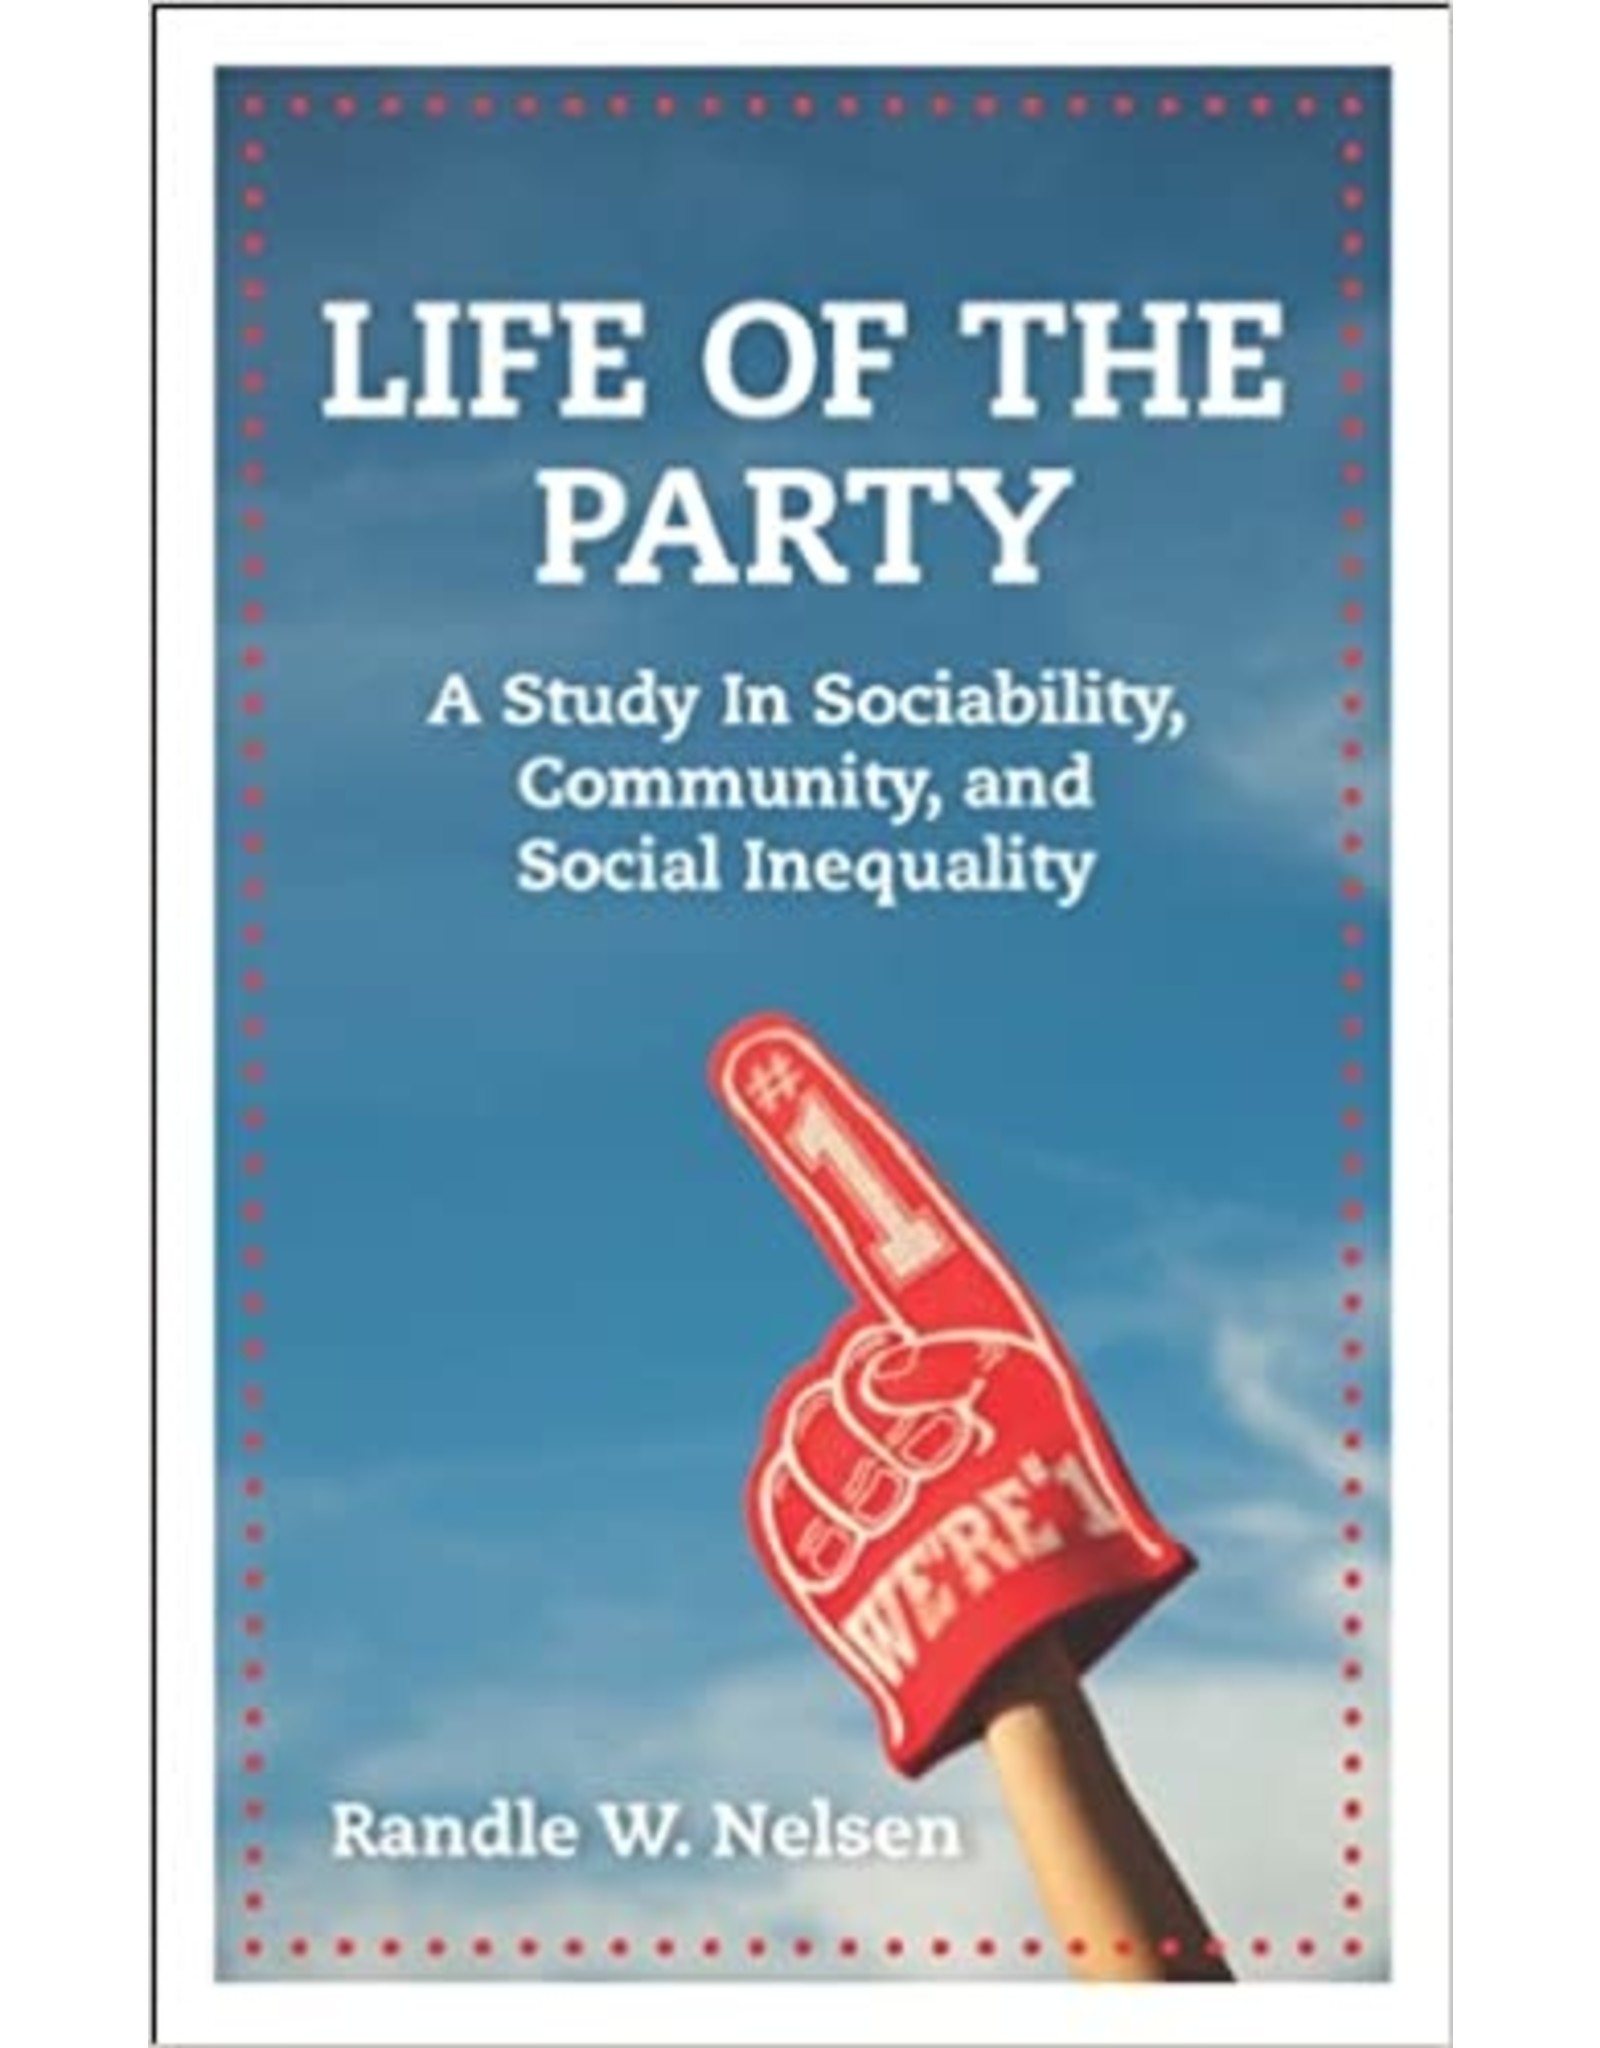 Literature Life of the Party: A Study in Sociability, Community, and Social Inequality